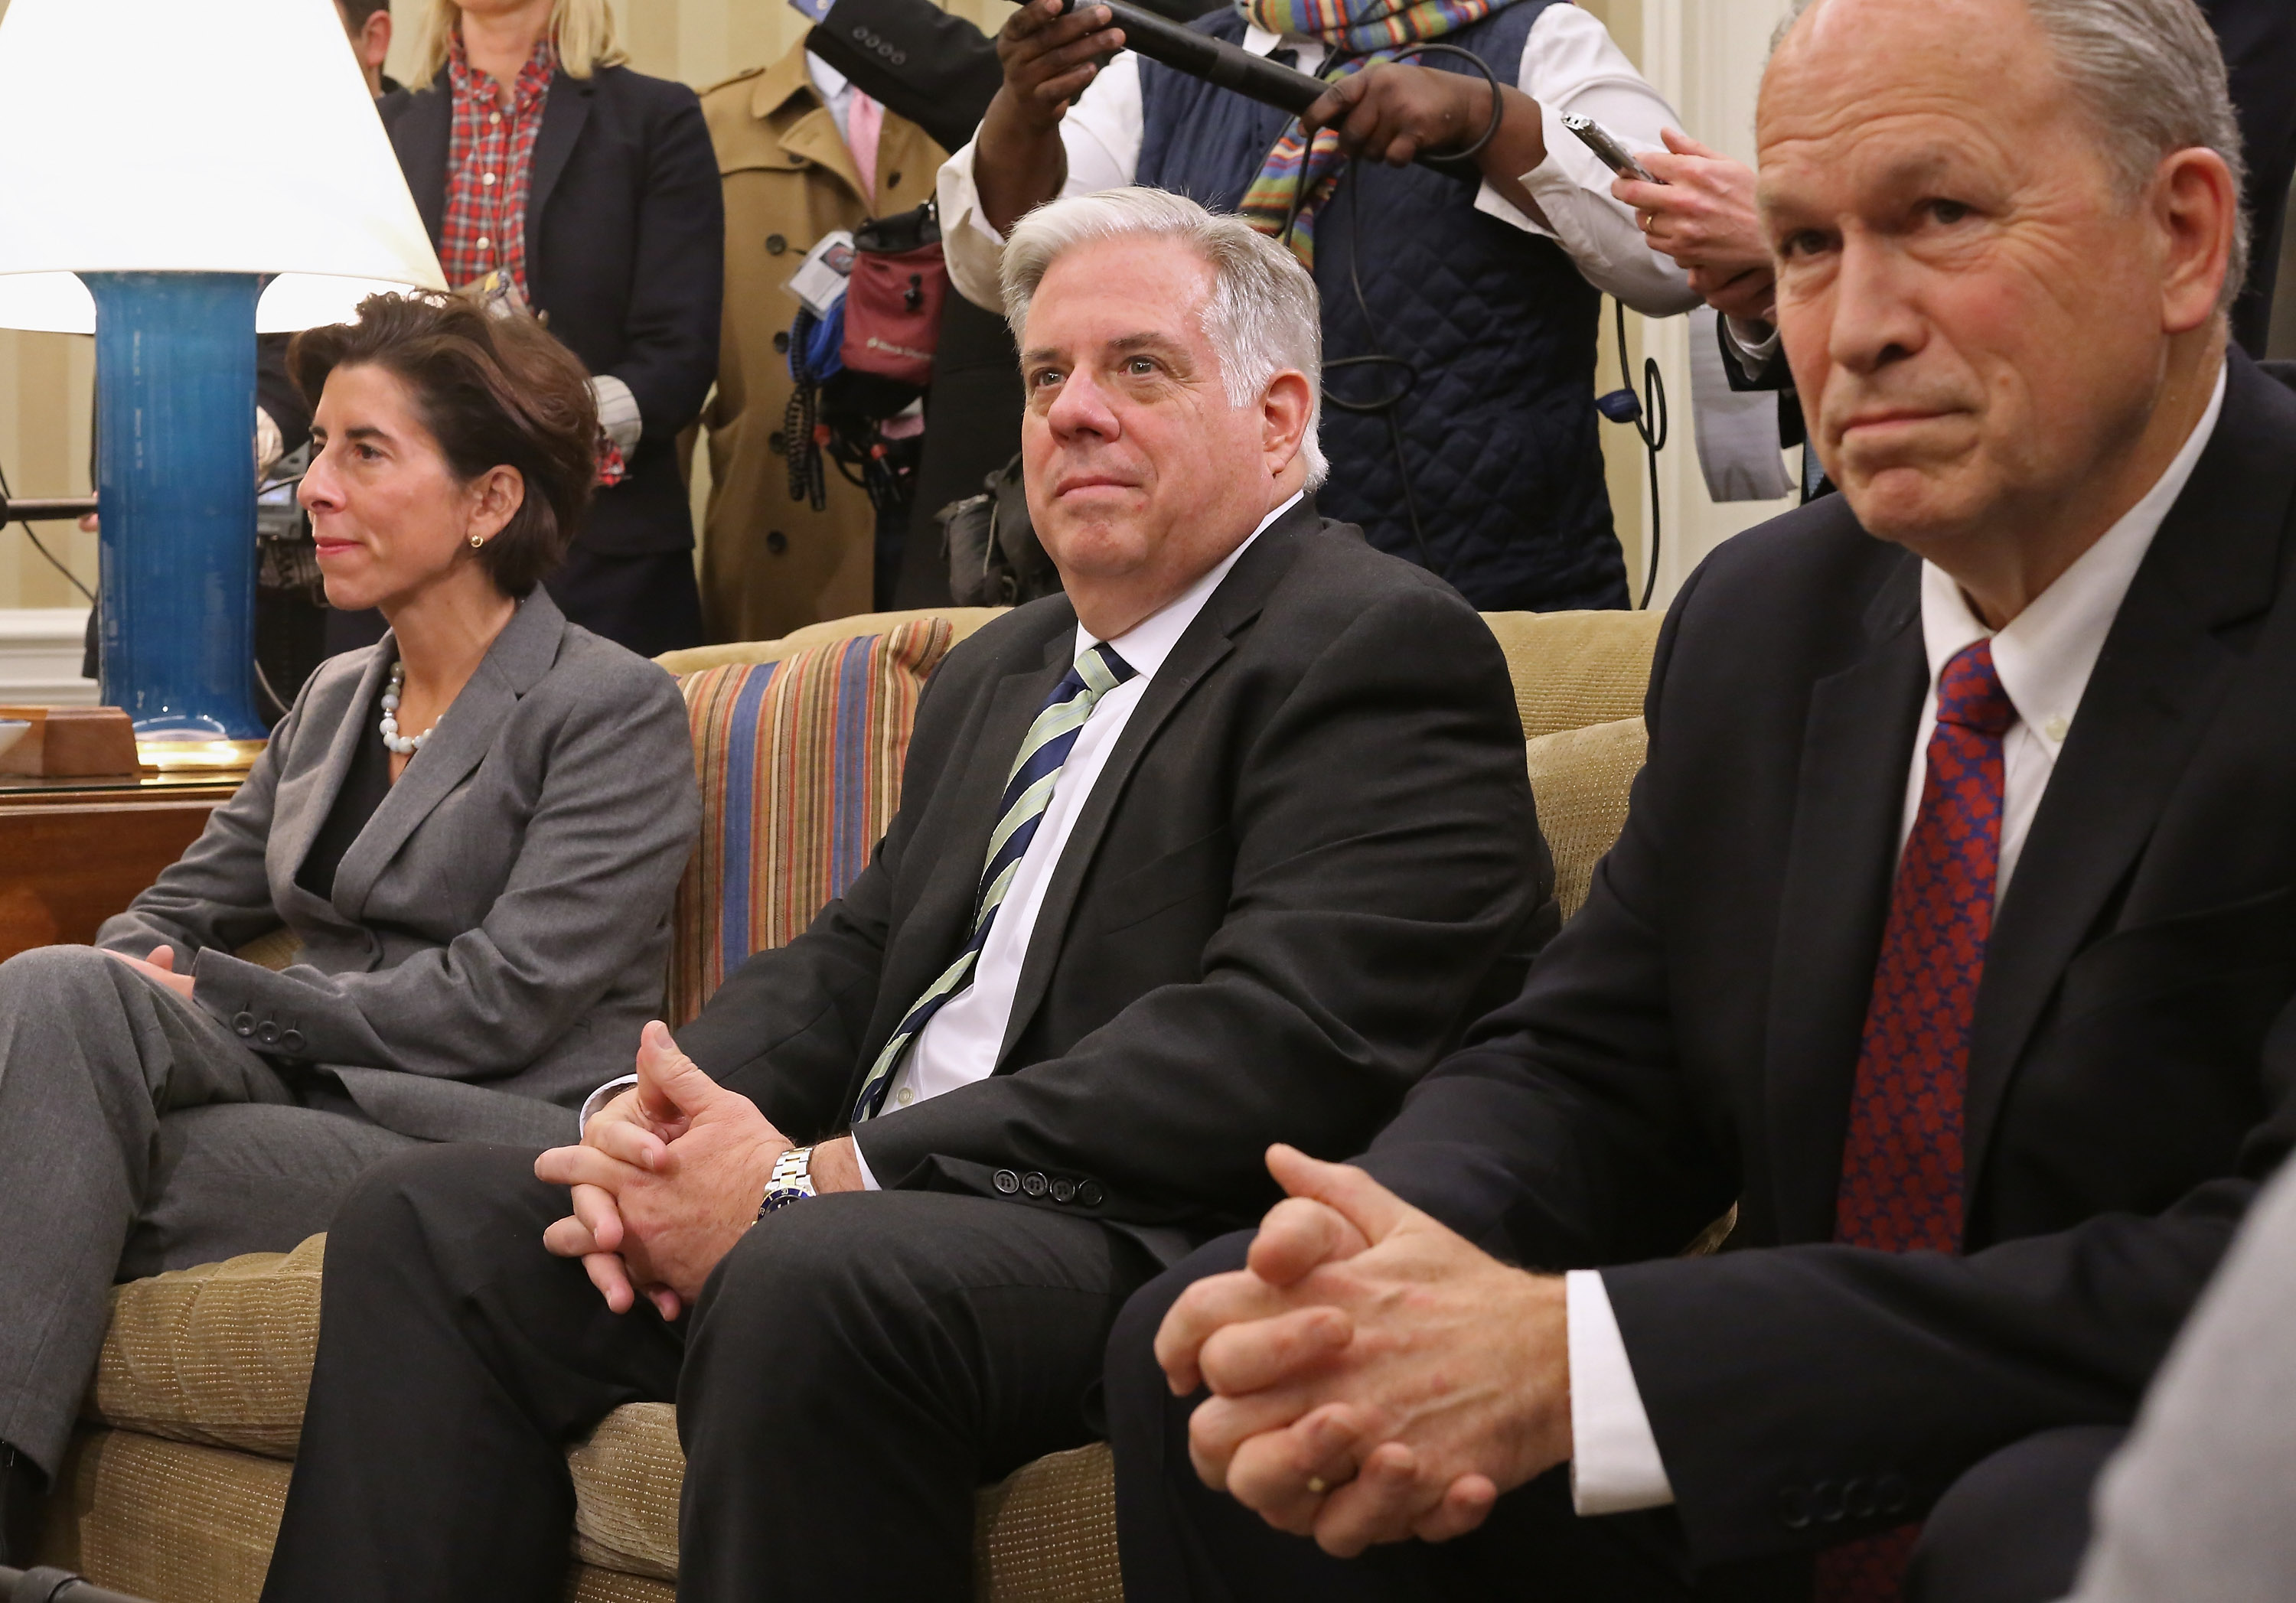 Governor Larry Hogan, center, during a meeting at the White House following his election. (Getty)